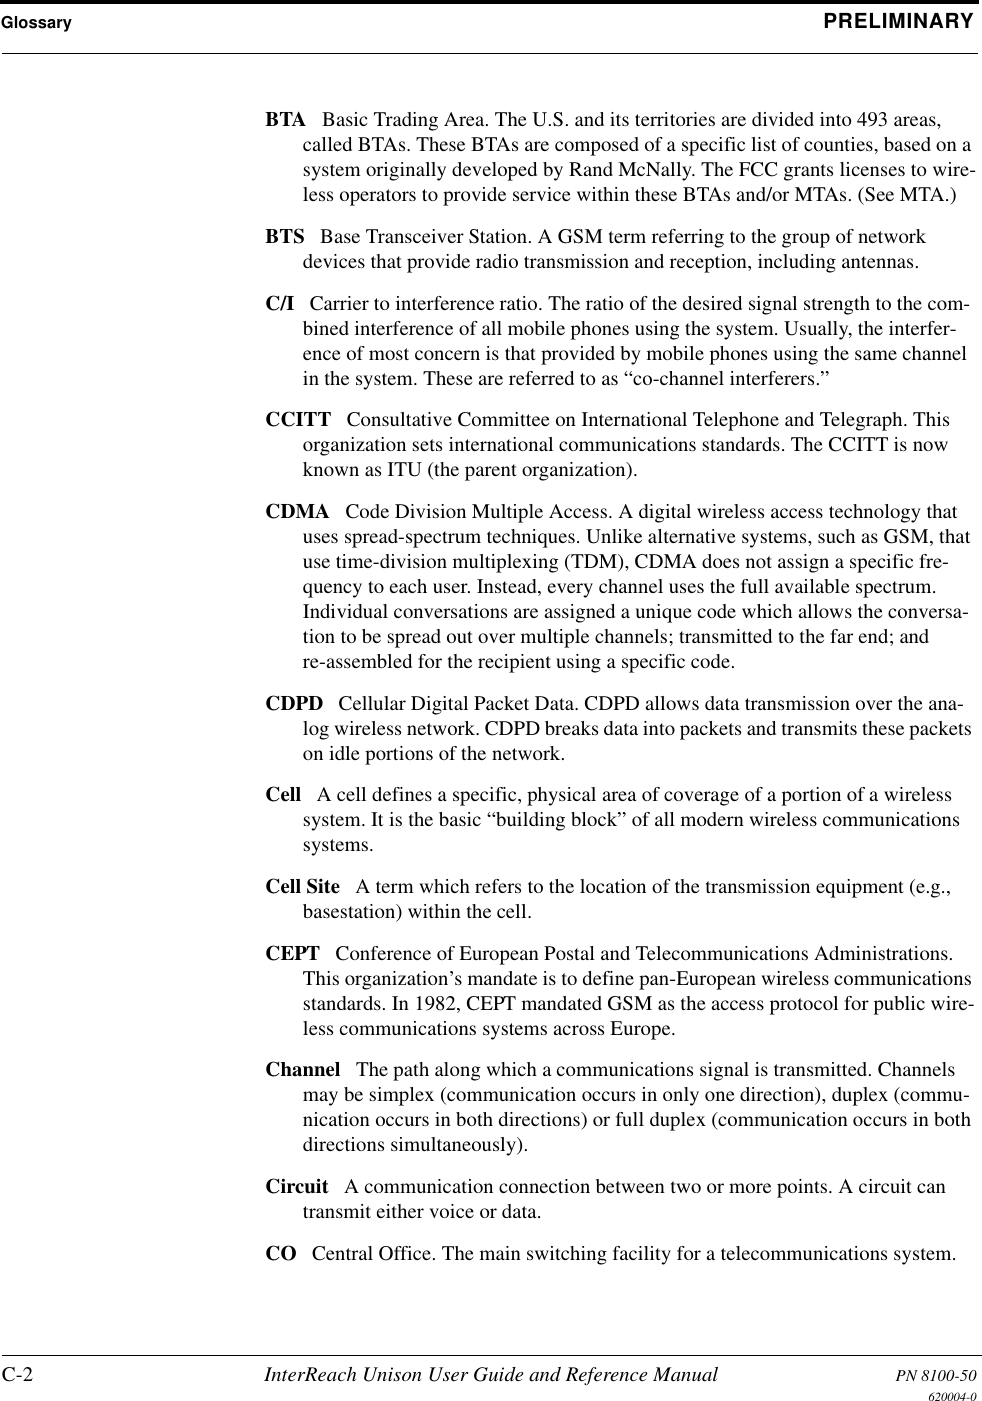 Glossary PRELIMINARYC-2 InterReach Unison User Guide and Reference Manual PN 8100-50620004-0BTA Basic Trading Area. The U.S. and its territories are divided into 493 areas, called BTAs. These BTAs are composed of a specific list of counties, based on a system originally developed by Rand McNally. The FCC grants licenses to wire-less operators to provide service within these BTAs and/or MTAs. (See MTA.) BTS Base Transceiver Station. A GSM term referring to the group of network devices that provide radio transmission and reception, including antennas. C/I Carrier to interference ratio. The ratio of the desired signal strength to the com-bined interference of all mobile phones using the system. Usually, the interfer-ence of most concern is that provided by mobile phones using the same channel in the system. These are referred to as “co-channel interferers.” CCITT Consultative Committee on International Telephone and Telegraph. This organization sets international communications standards. The CCITT is now known as ITU (the parent organization). CDMA Code Division Multiple Access. A digital wireless access technology that uses spread-spectrum techniques. Unlike alternative systems, such as GSM, that use time-division multiplexing (TDM), CDMA does not assign a specific fre-quency to each user. Instead, every channel uses the full available spectrum. Individual conversations are assigned a unique code which allows the conversa-tion to be spread out over multiple channels; transmitted to the far end; and re-assembled for the recipient using a specific code. CDPD Cellular Digital Packet Data. CDPD allows data transmission over the ana-log wireless network. CDPD breaks data into packets and transmits these packets on idle portions of the network. Cell A cell defines a specific, physical area of coverage of a portion of a wireless system. It is the basic “building block” of all modern wireless communications systems. Cell Site A term which refers to the location of the transmission equipment (e.g., basestation) within the cell. CEPT Conference of European Postal and Telecommunications Administrations. This organization’s mandate is to define pan-European wireless communications standards. In 1982, CEPT mandated GSM as the access protocol for public wire-less communications systems across Europe. Channel The path along which a communications signal is transmitted. Channels may be simplex (communication occurs in only one direction), duplex (commu-nication occurs in both directions) or full duplex (communication occurs in both directions simultaneously). Circuit A communication connection between two or more points. A circuit can transmit either voice or data. CO Central Office. The main switching facility for a telecommunications system. 